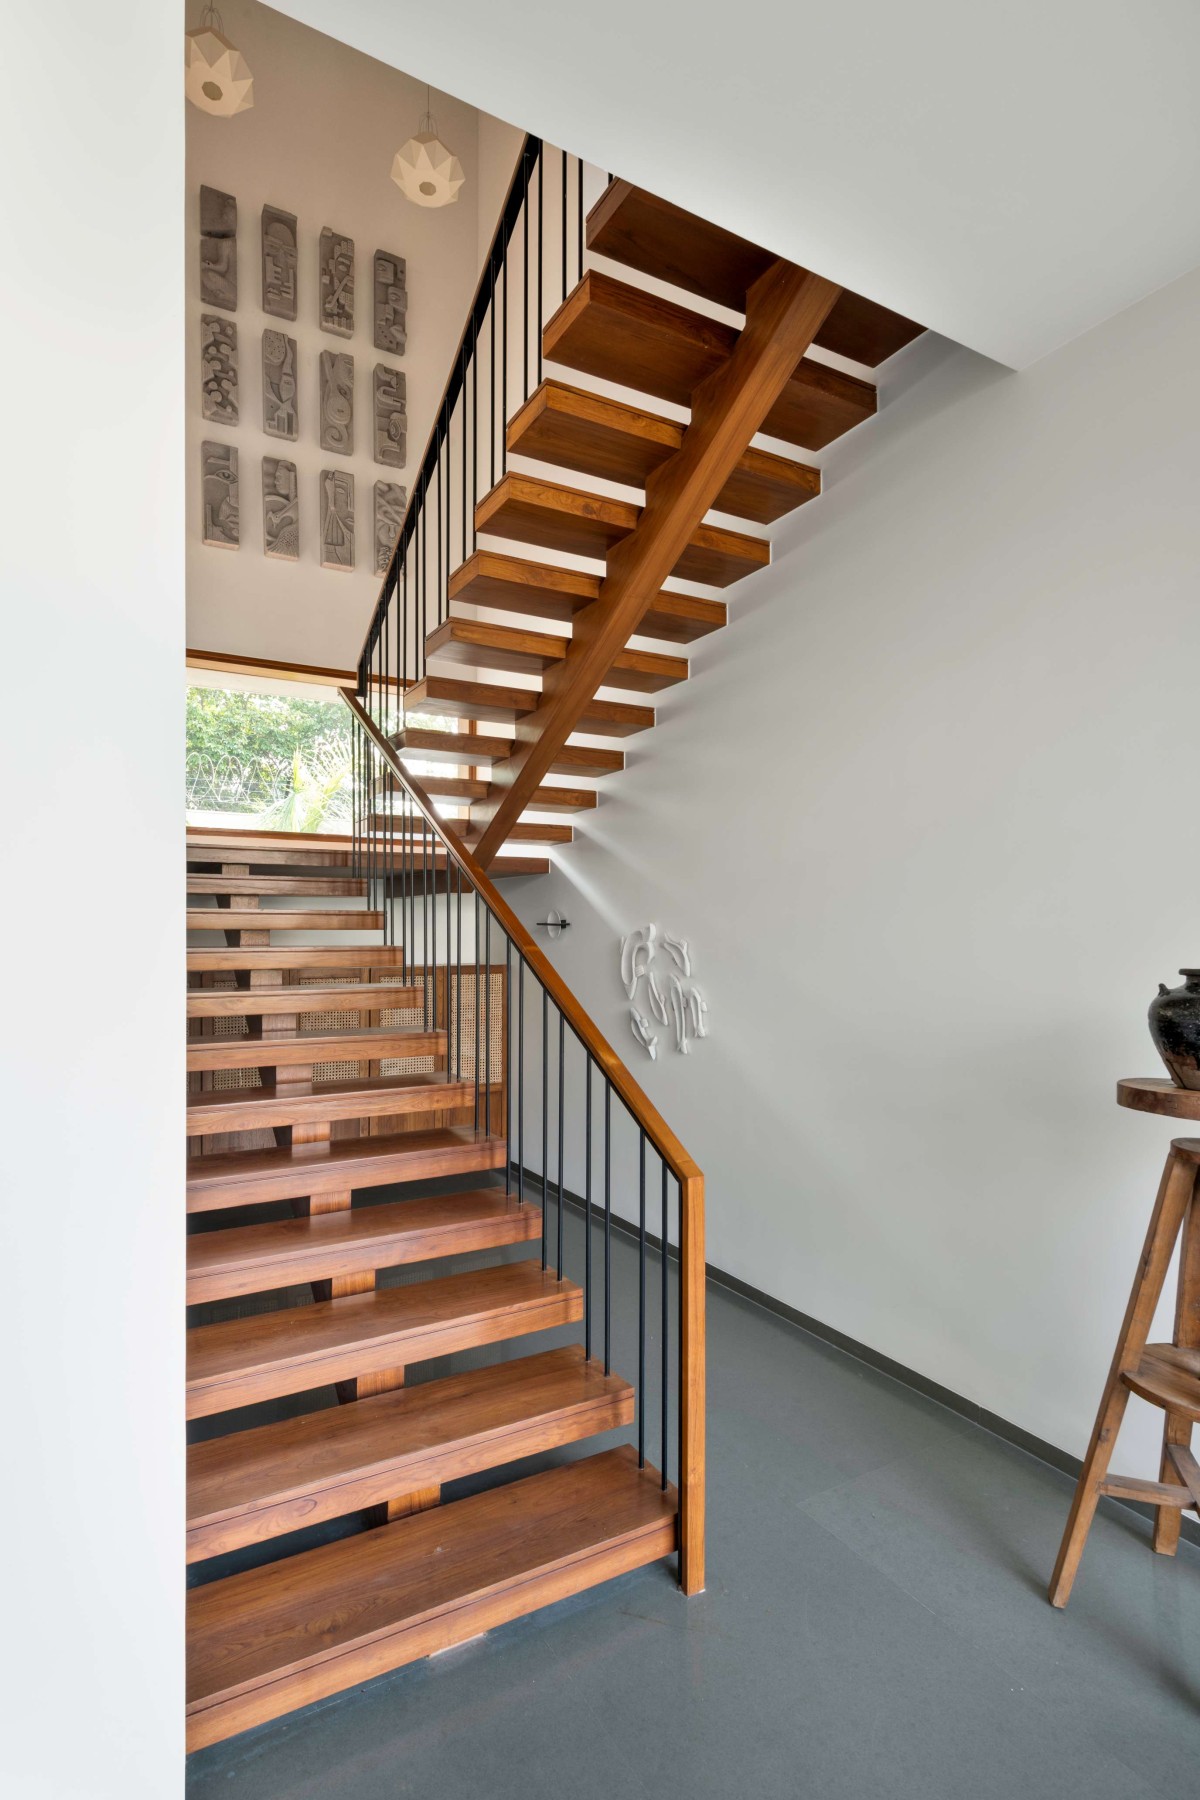 Staircase of Hovering House of Parikhs by Anarr Gunjaria Interiors and Modo Design